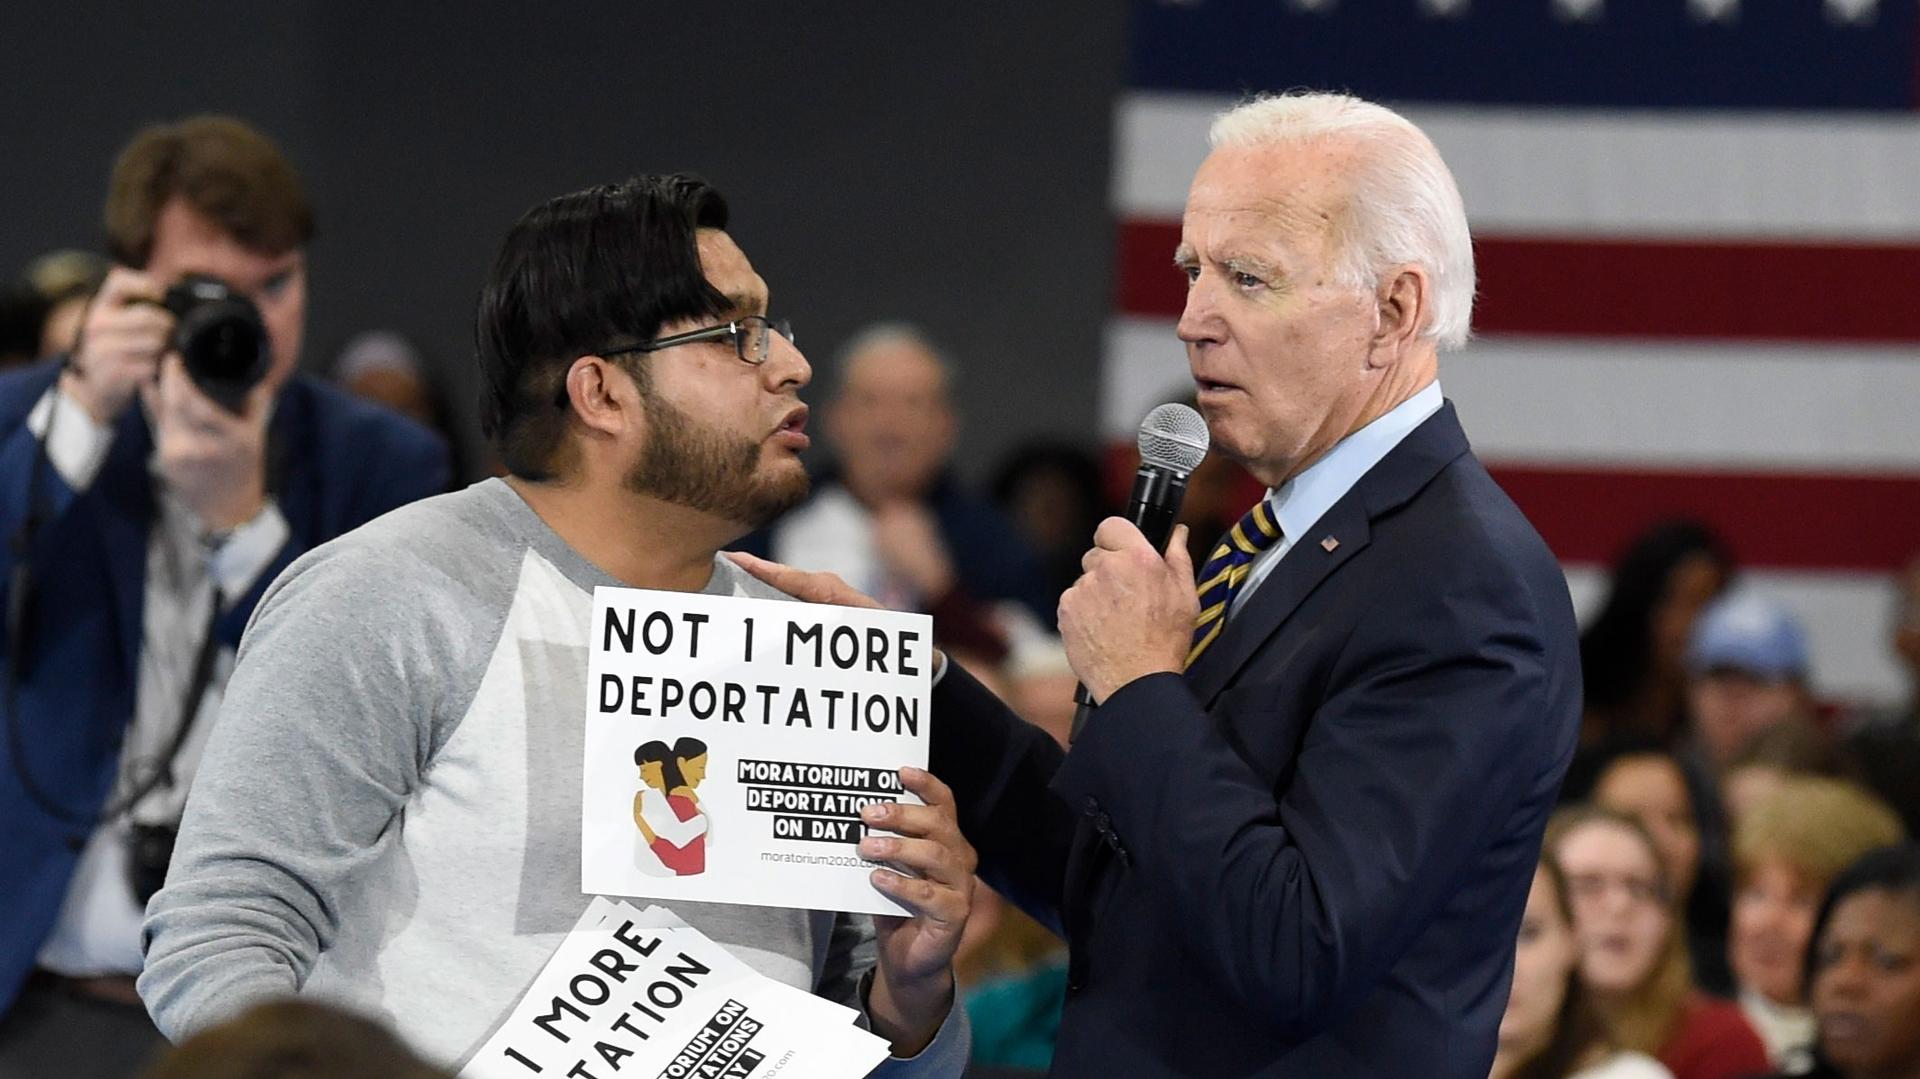 A man is shown holding a sign that reads "Not 1 more deportation" while speaking to Joe Biden who is holding a microphone.